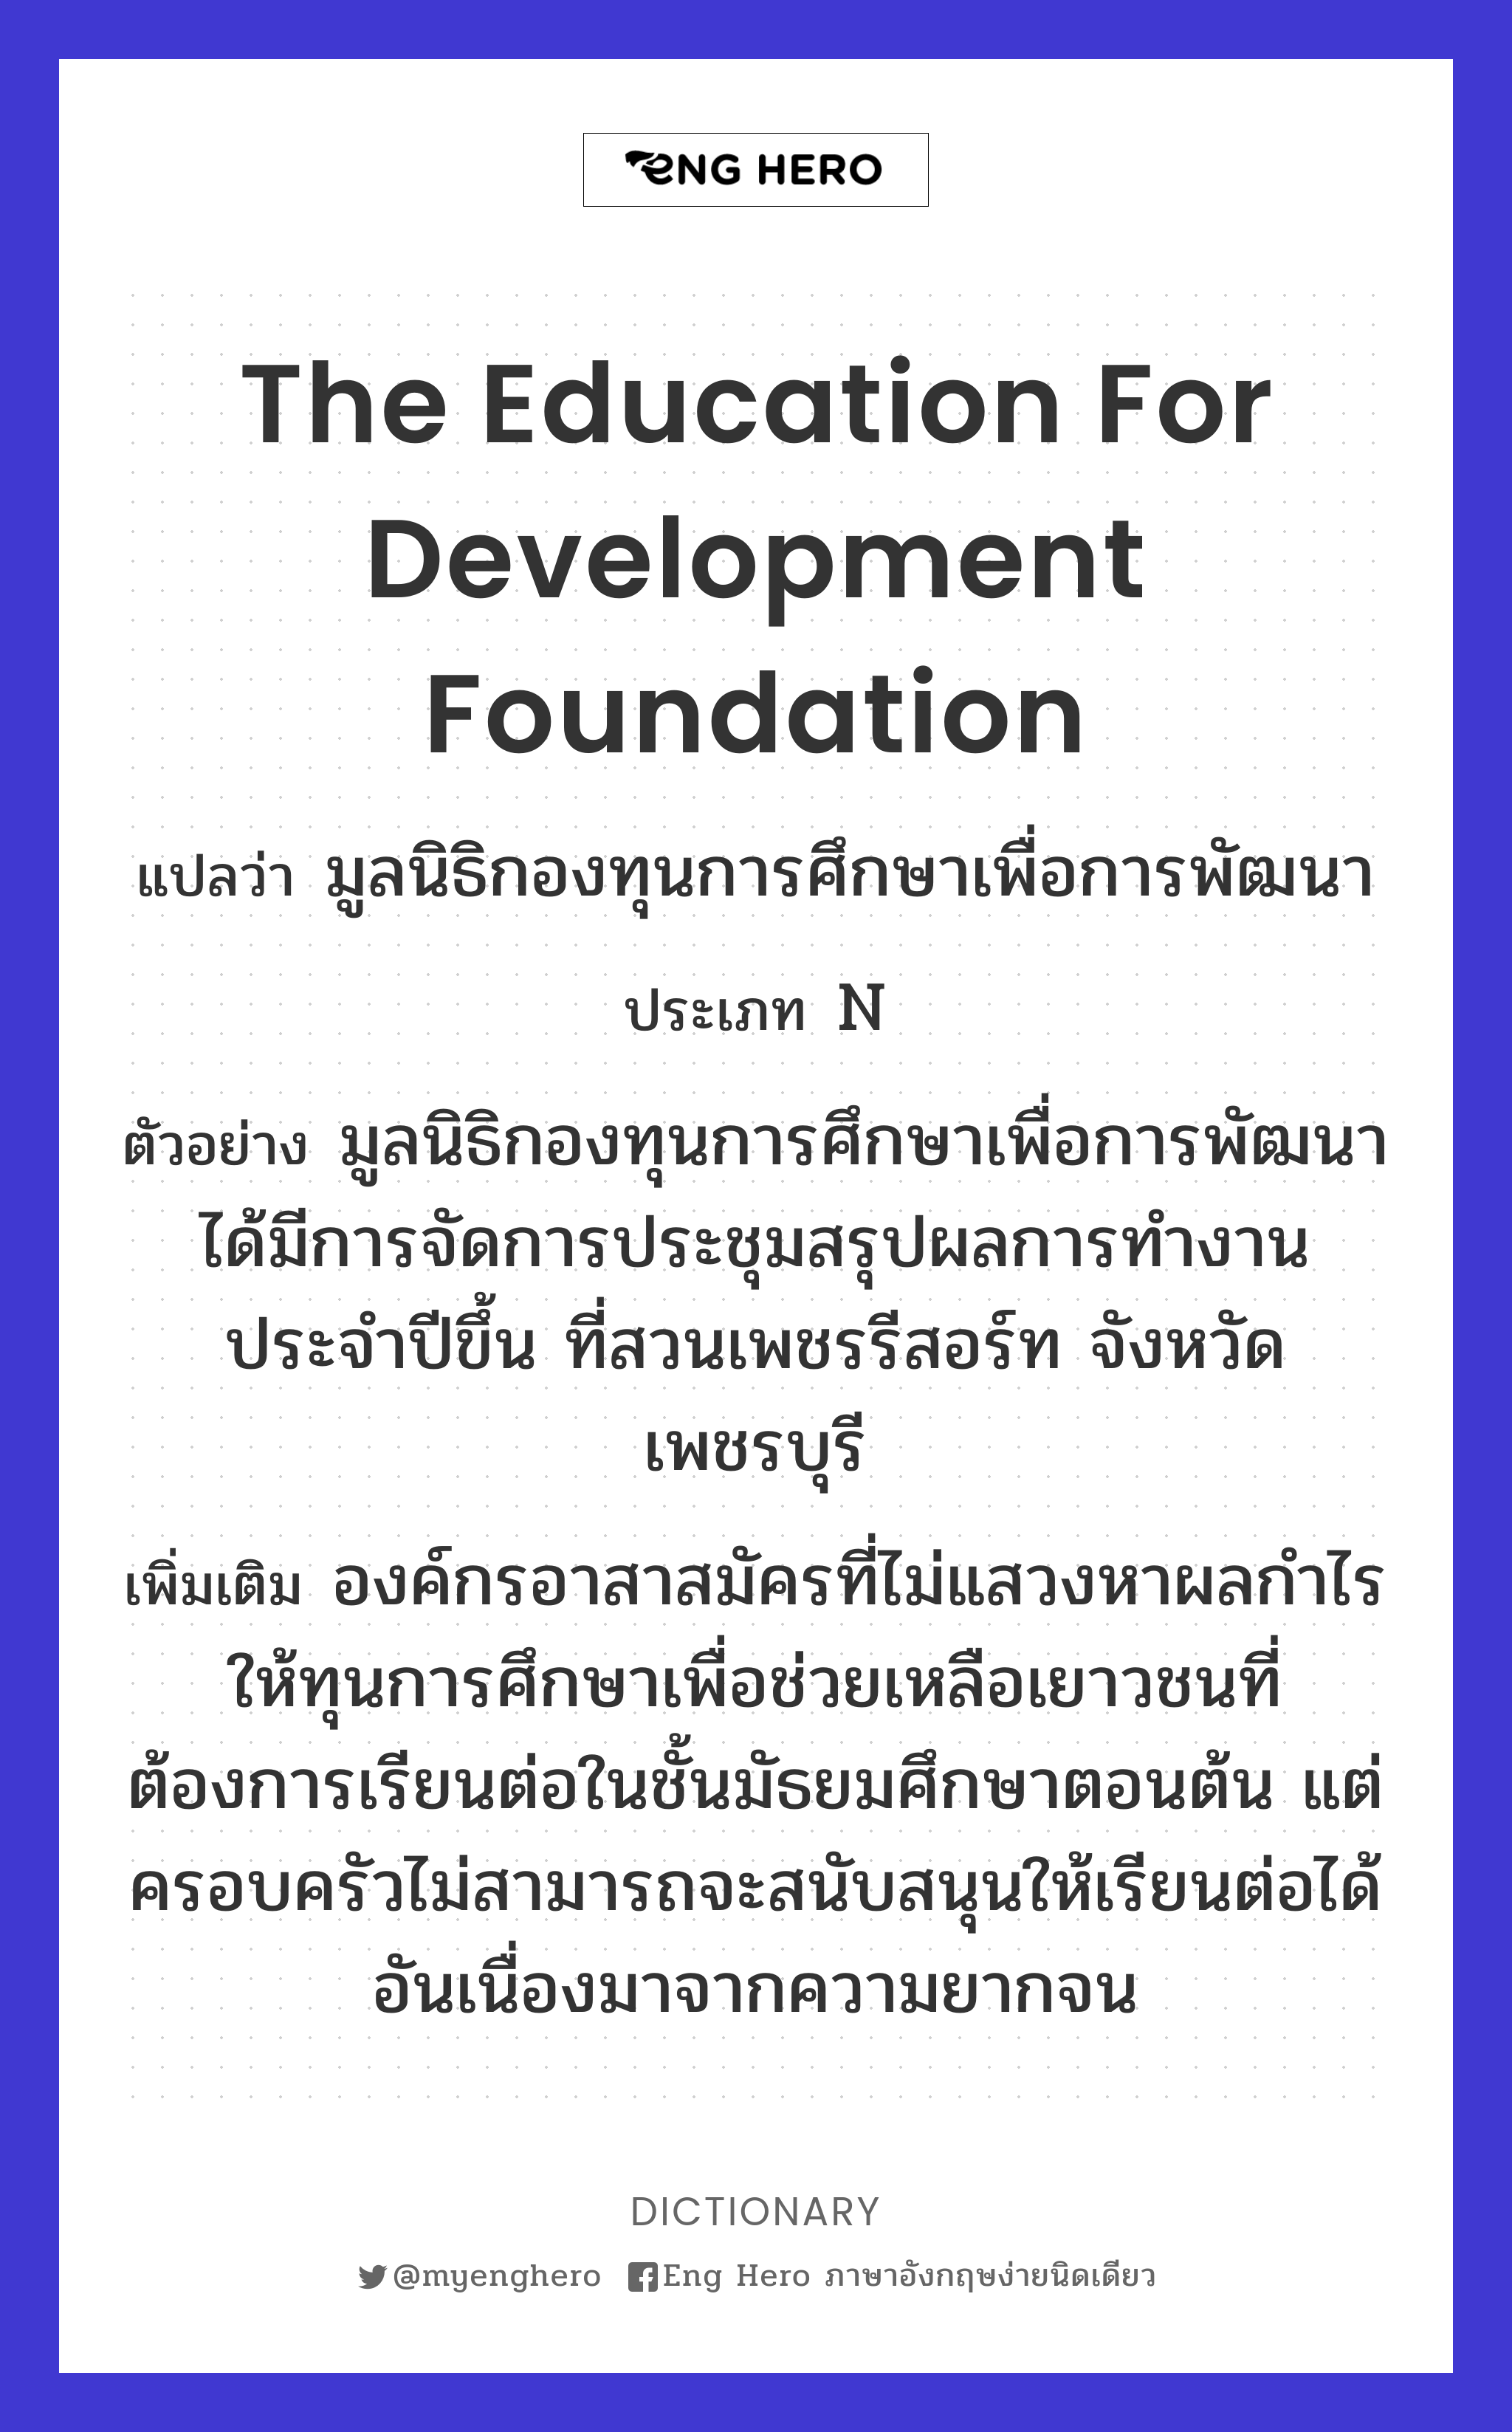 The Education for Development Foundation